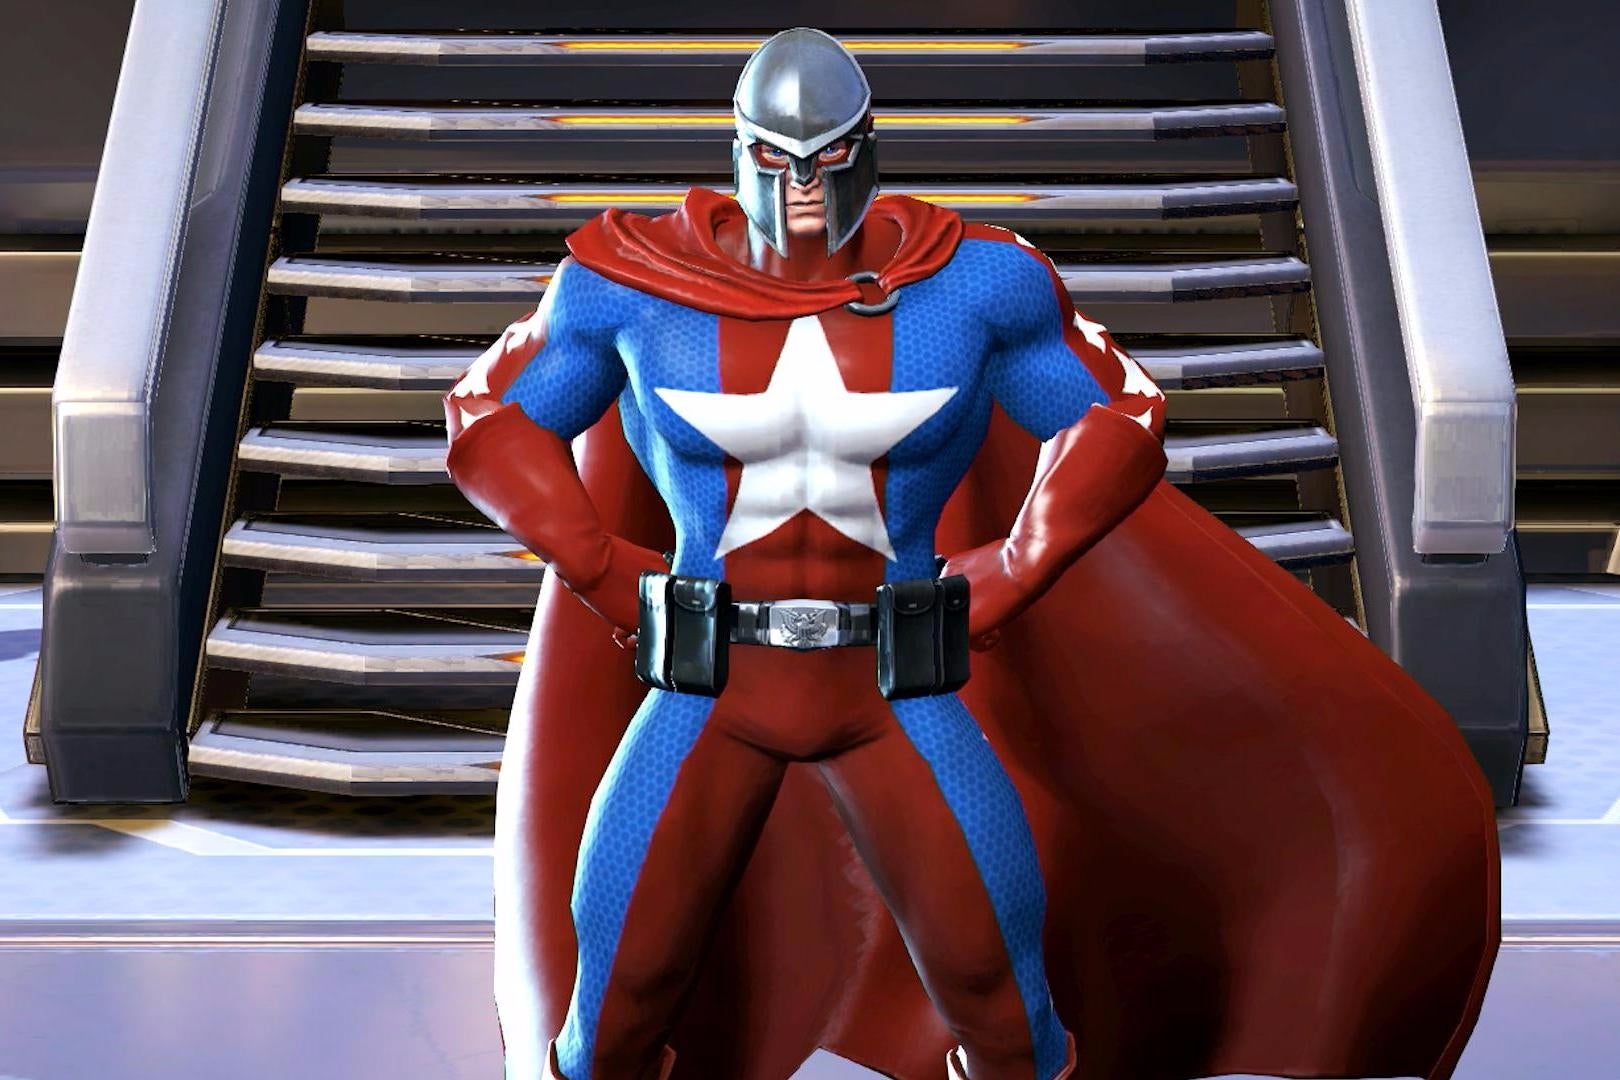 Image for There's an all-star NCsoft MOBA and it's got Statesman from City of Heroes